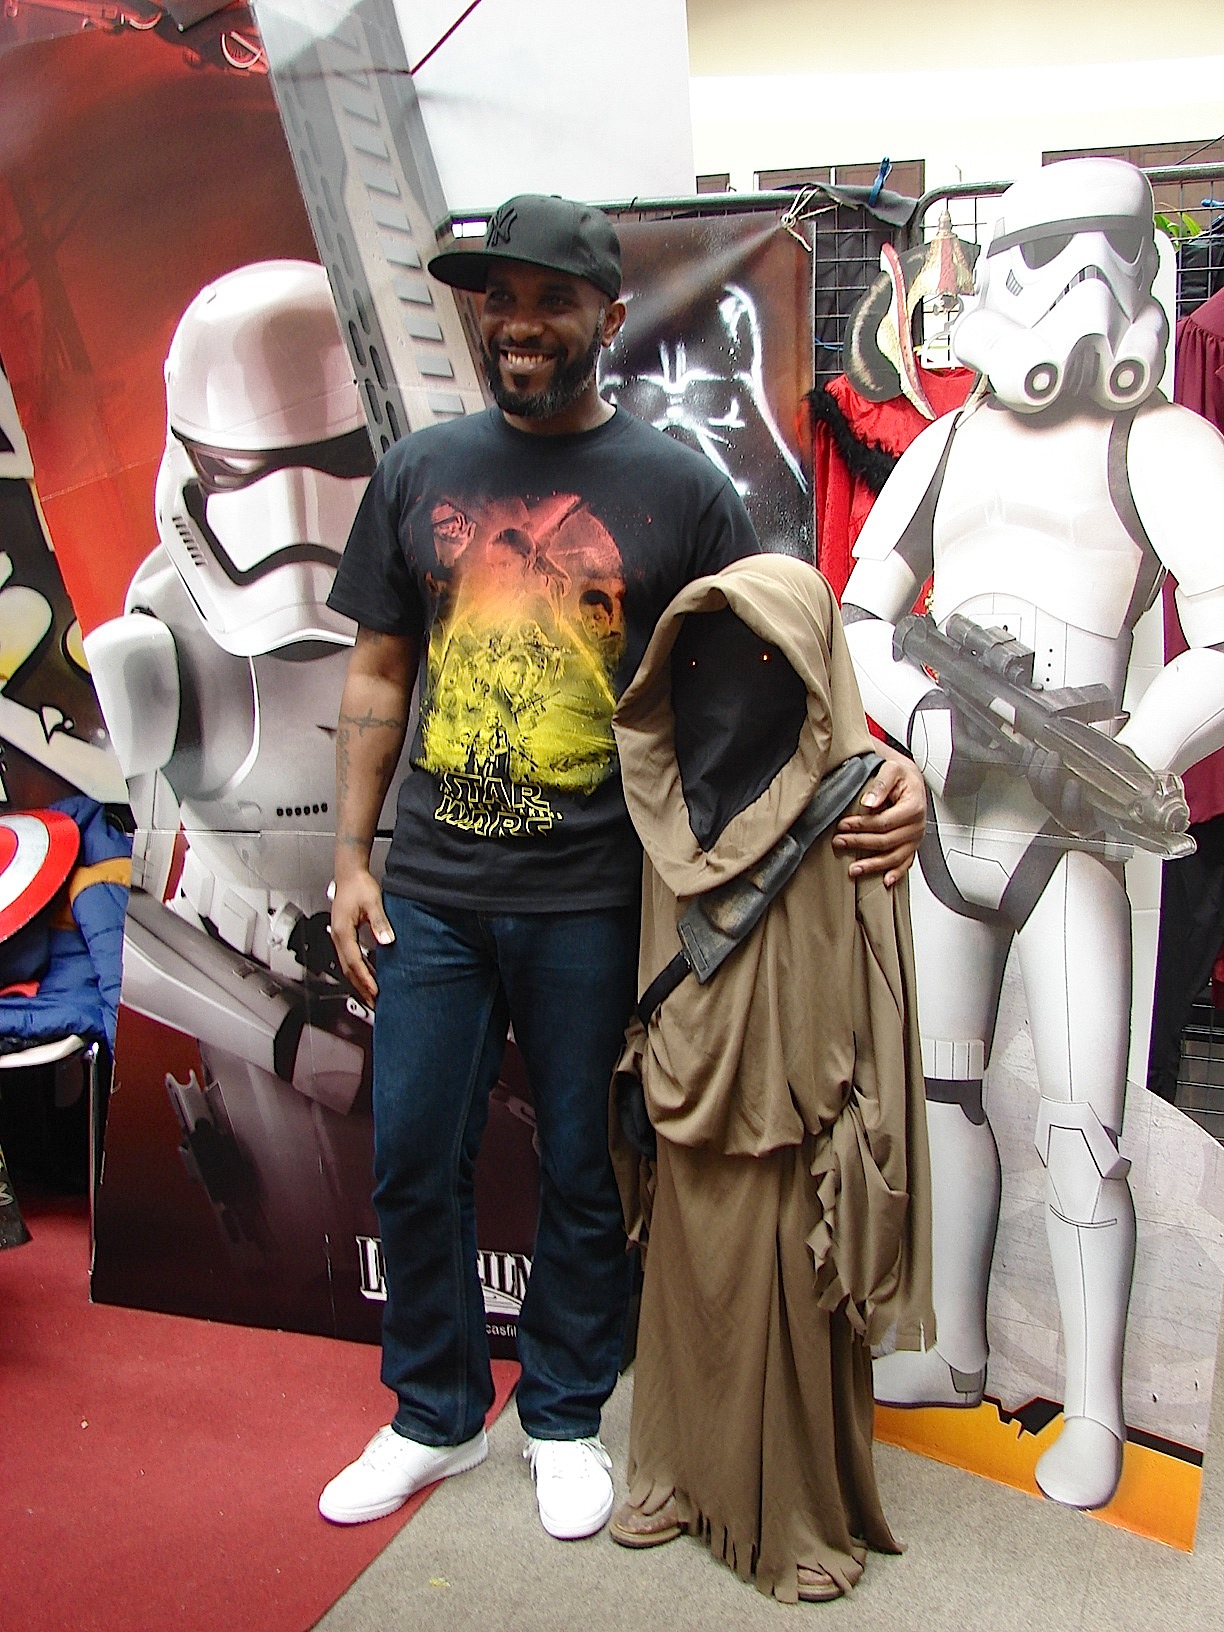 Stormtrooper Actor Phoenix James at ASFA Star Wars Convention in Amélie les Bains in South of France - Photo by Virginie Maurille 47